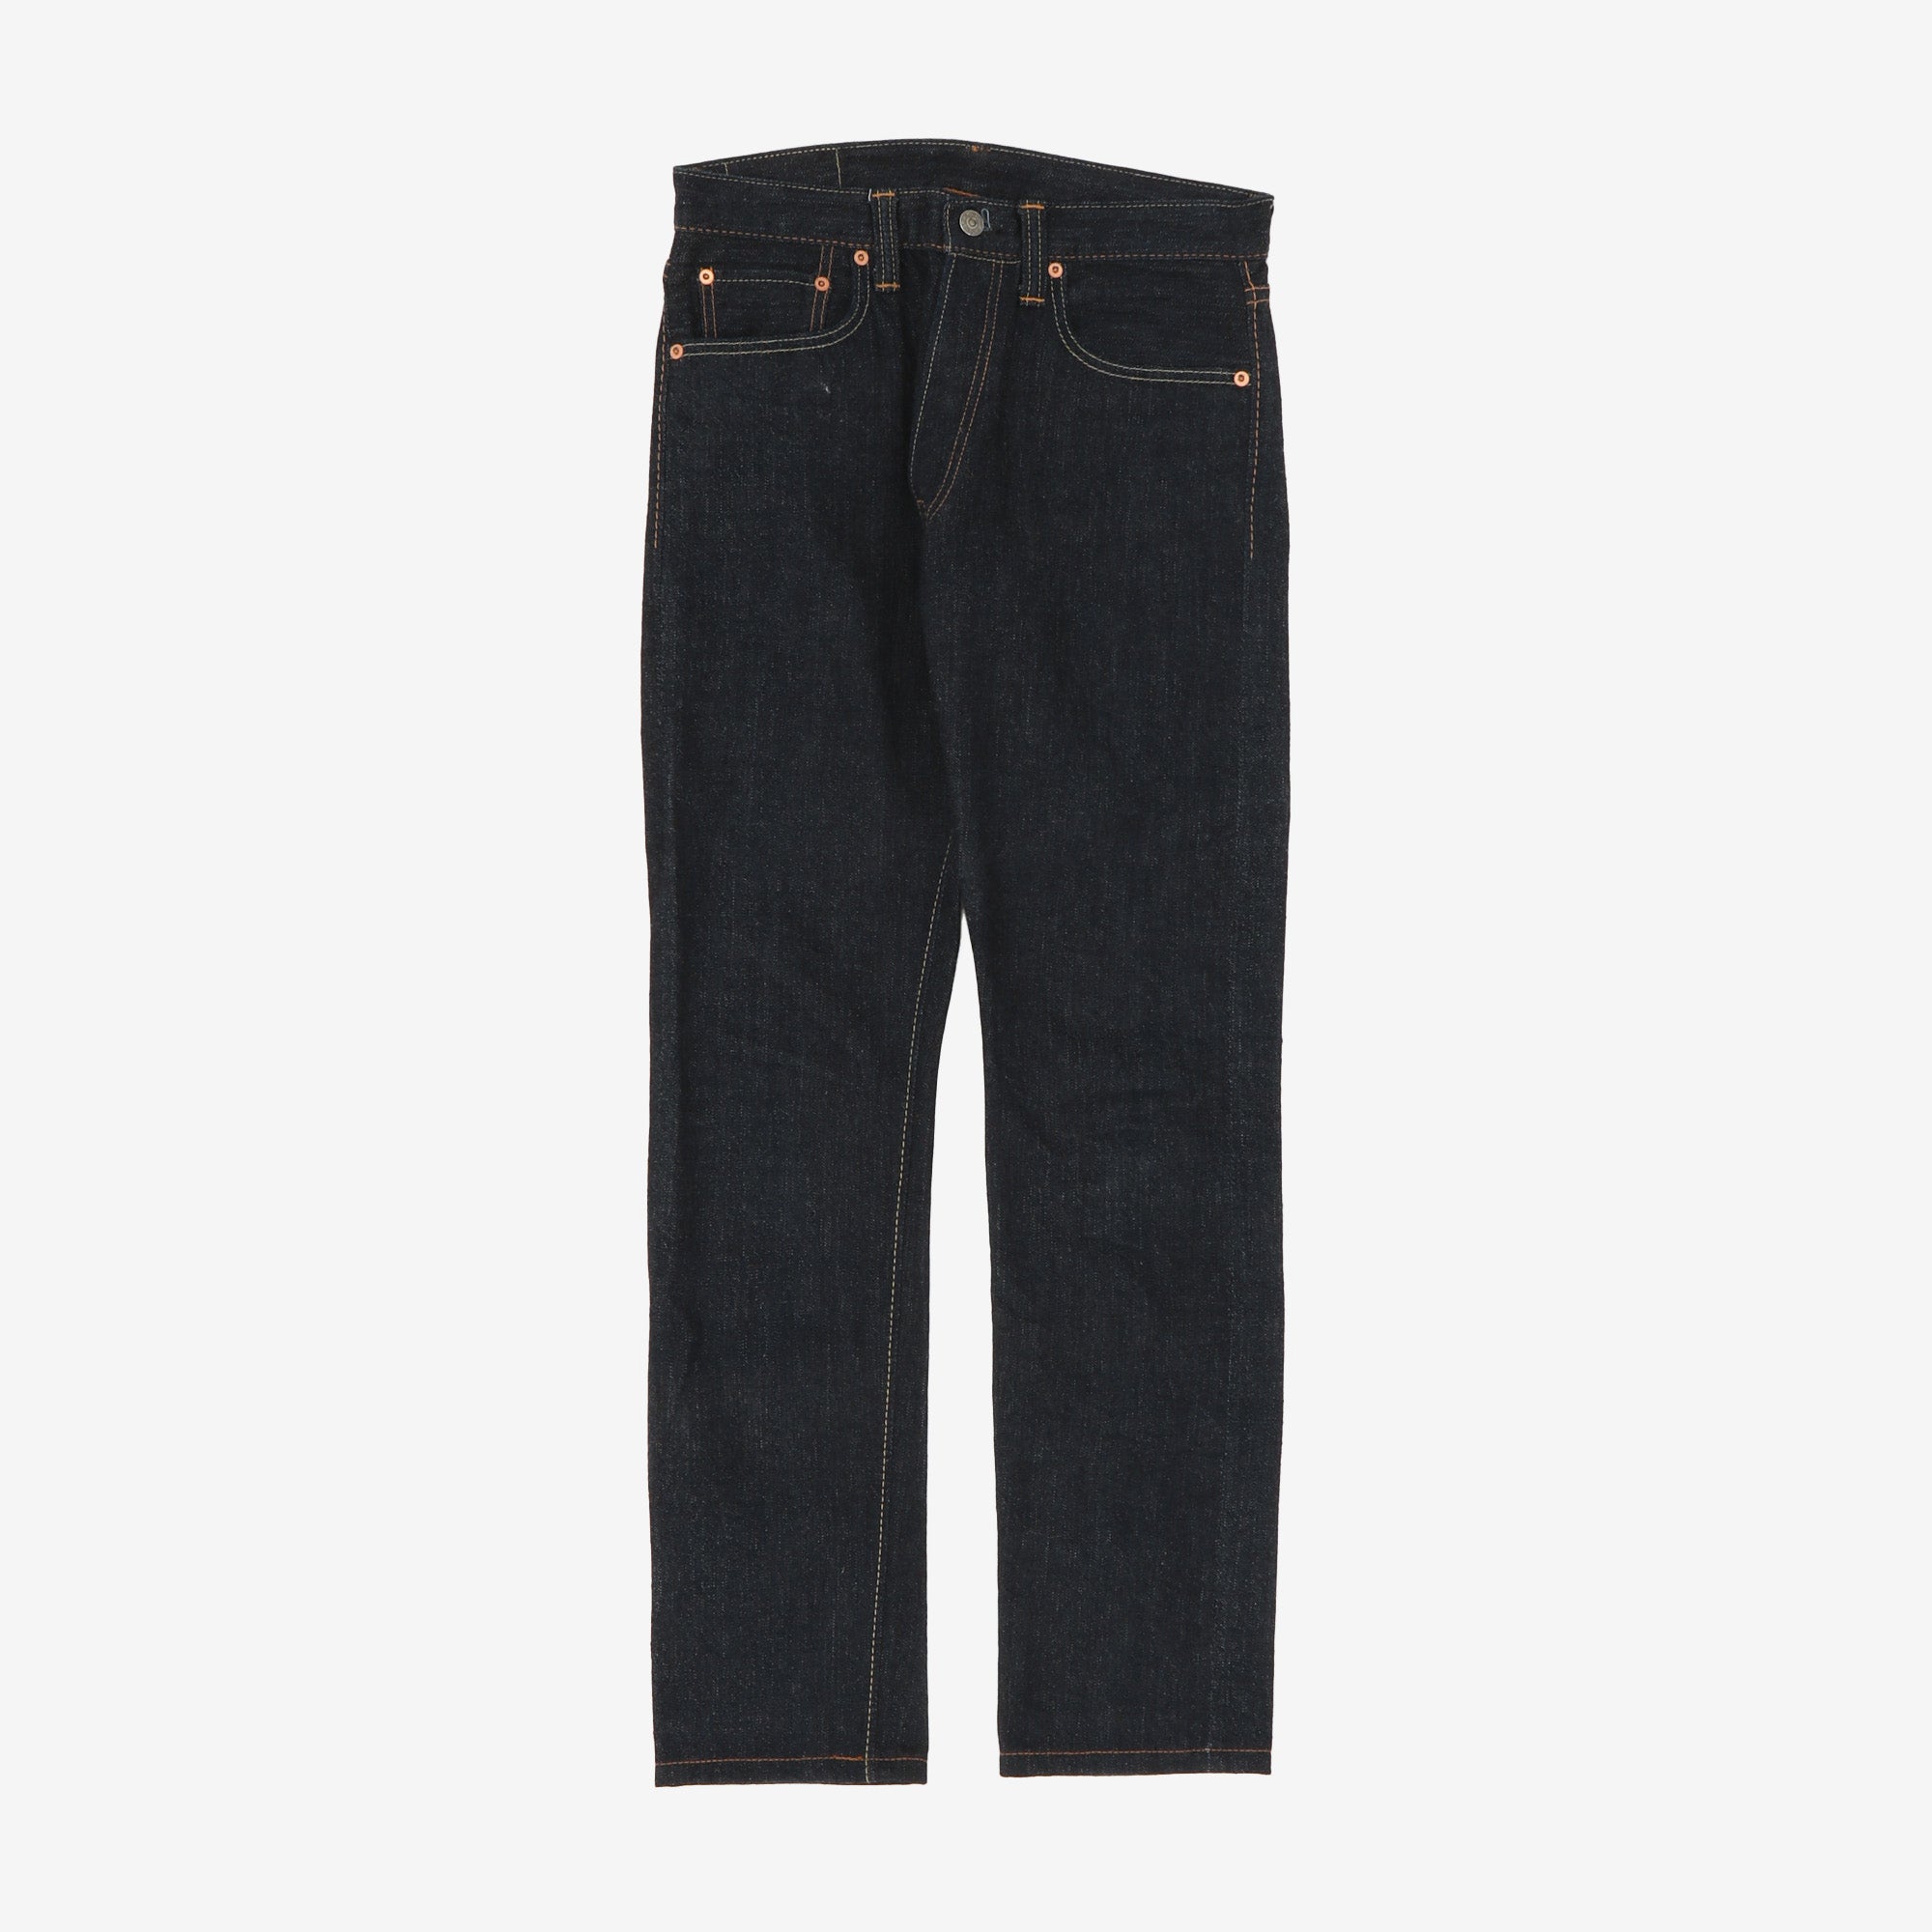 OG-019 14oz Releaxed Tapered Jeans